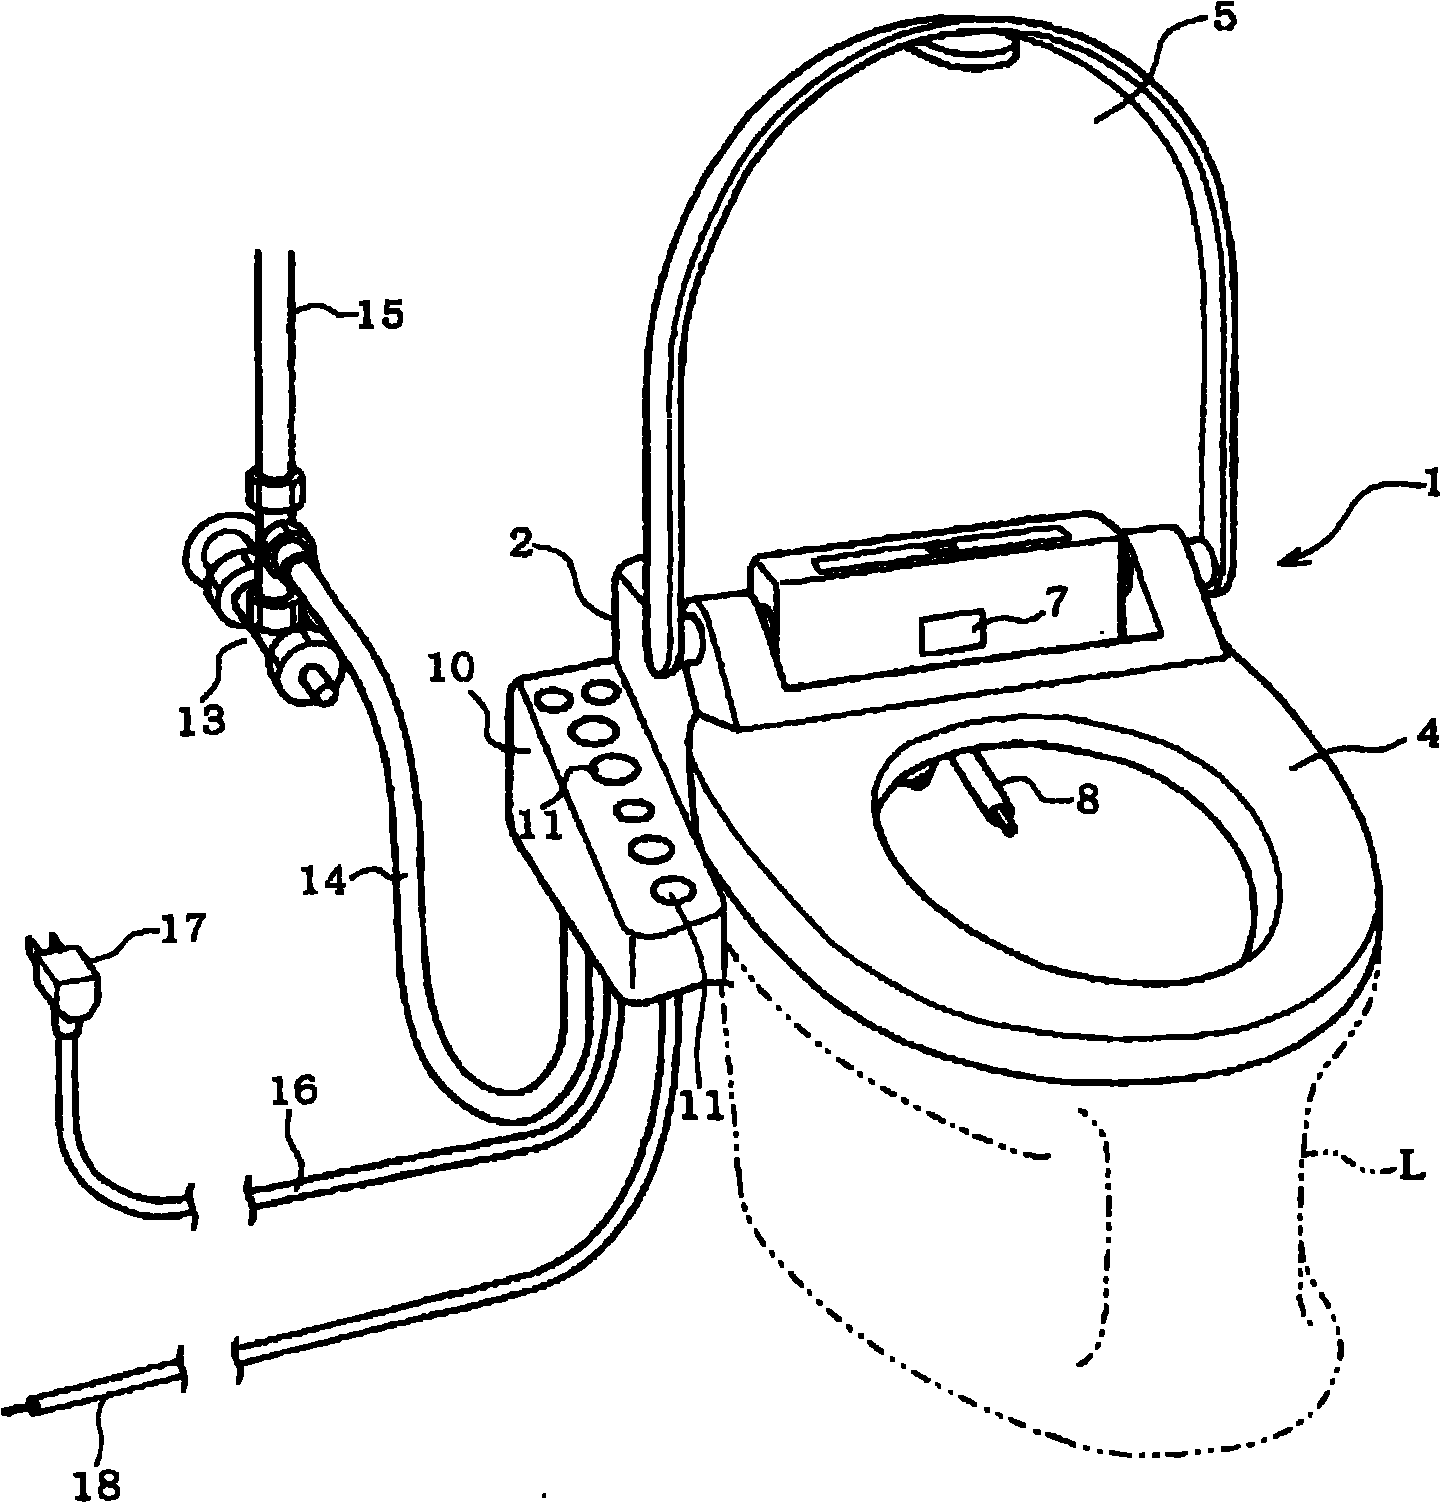 Hot water cleaning toilet seat